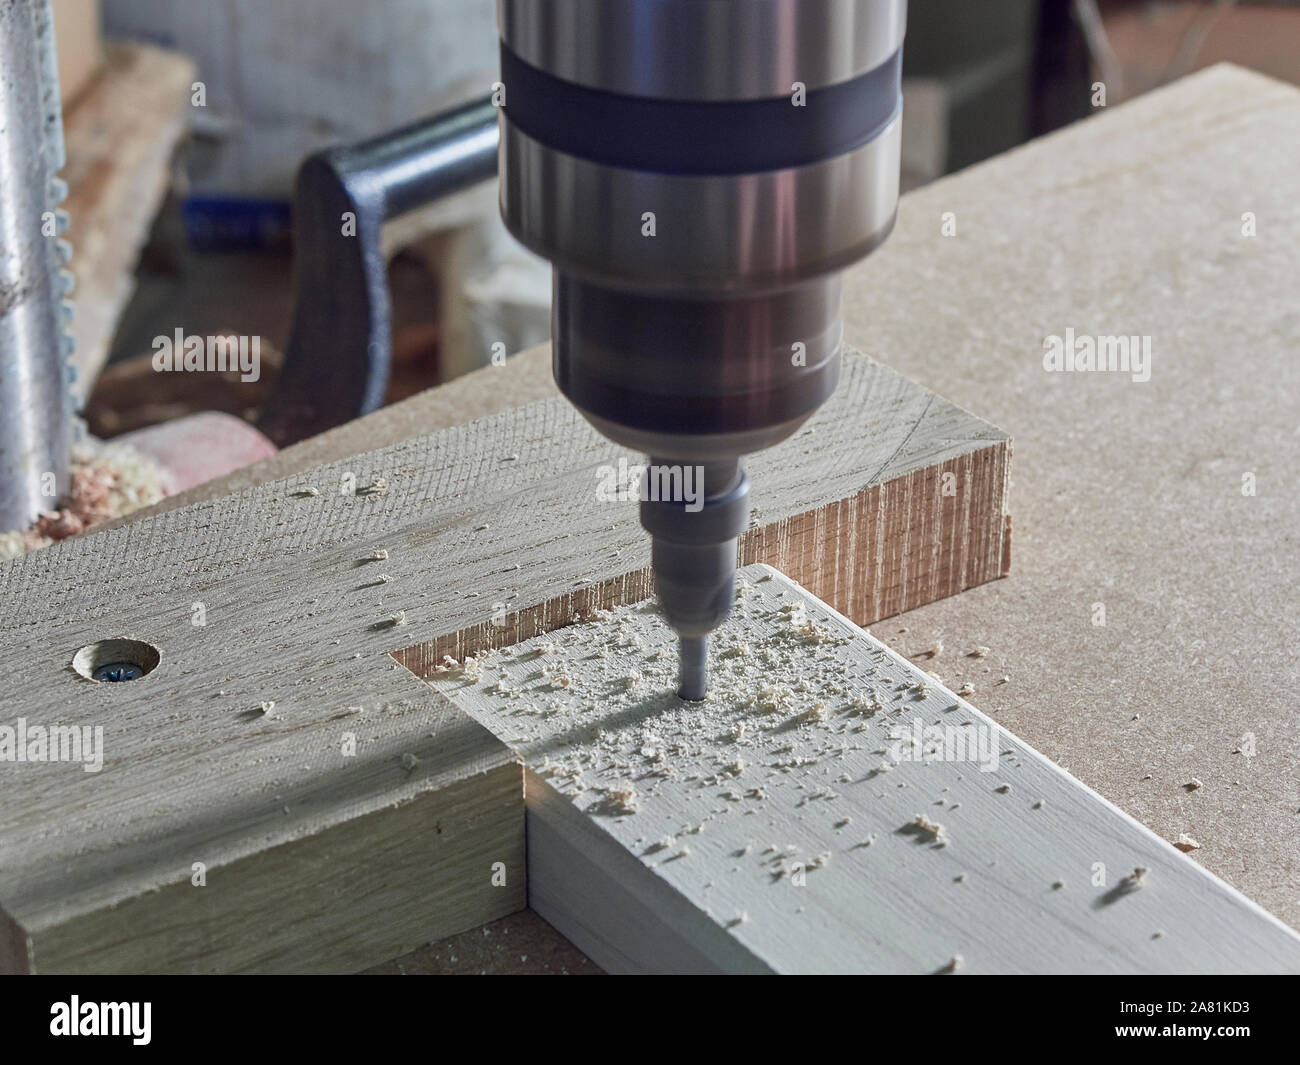 A close up of a drill bit and a chuck that belongs to a pillar drill being used to make a hole in a piece of Tulipwood in a joiners workshop, UK Stock Photo